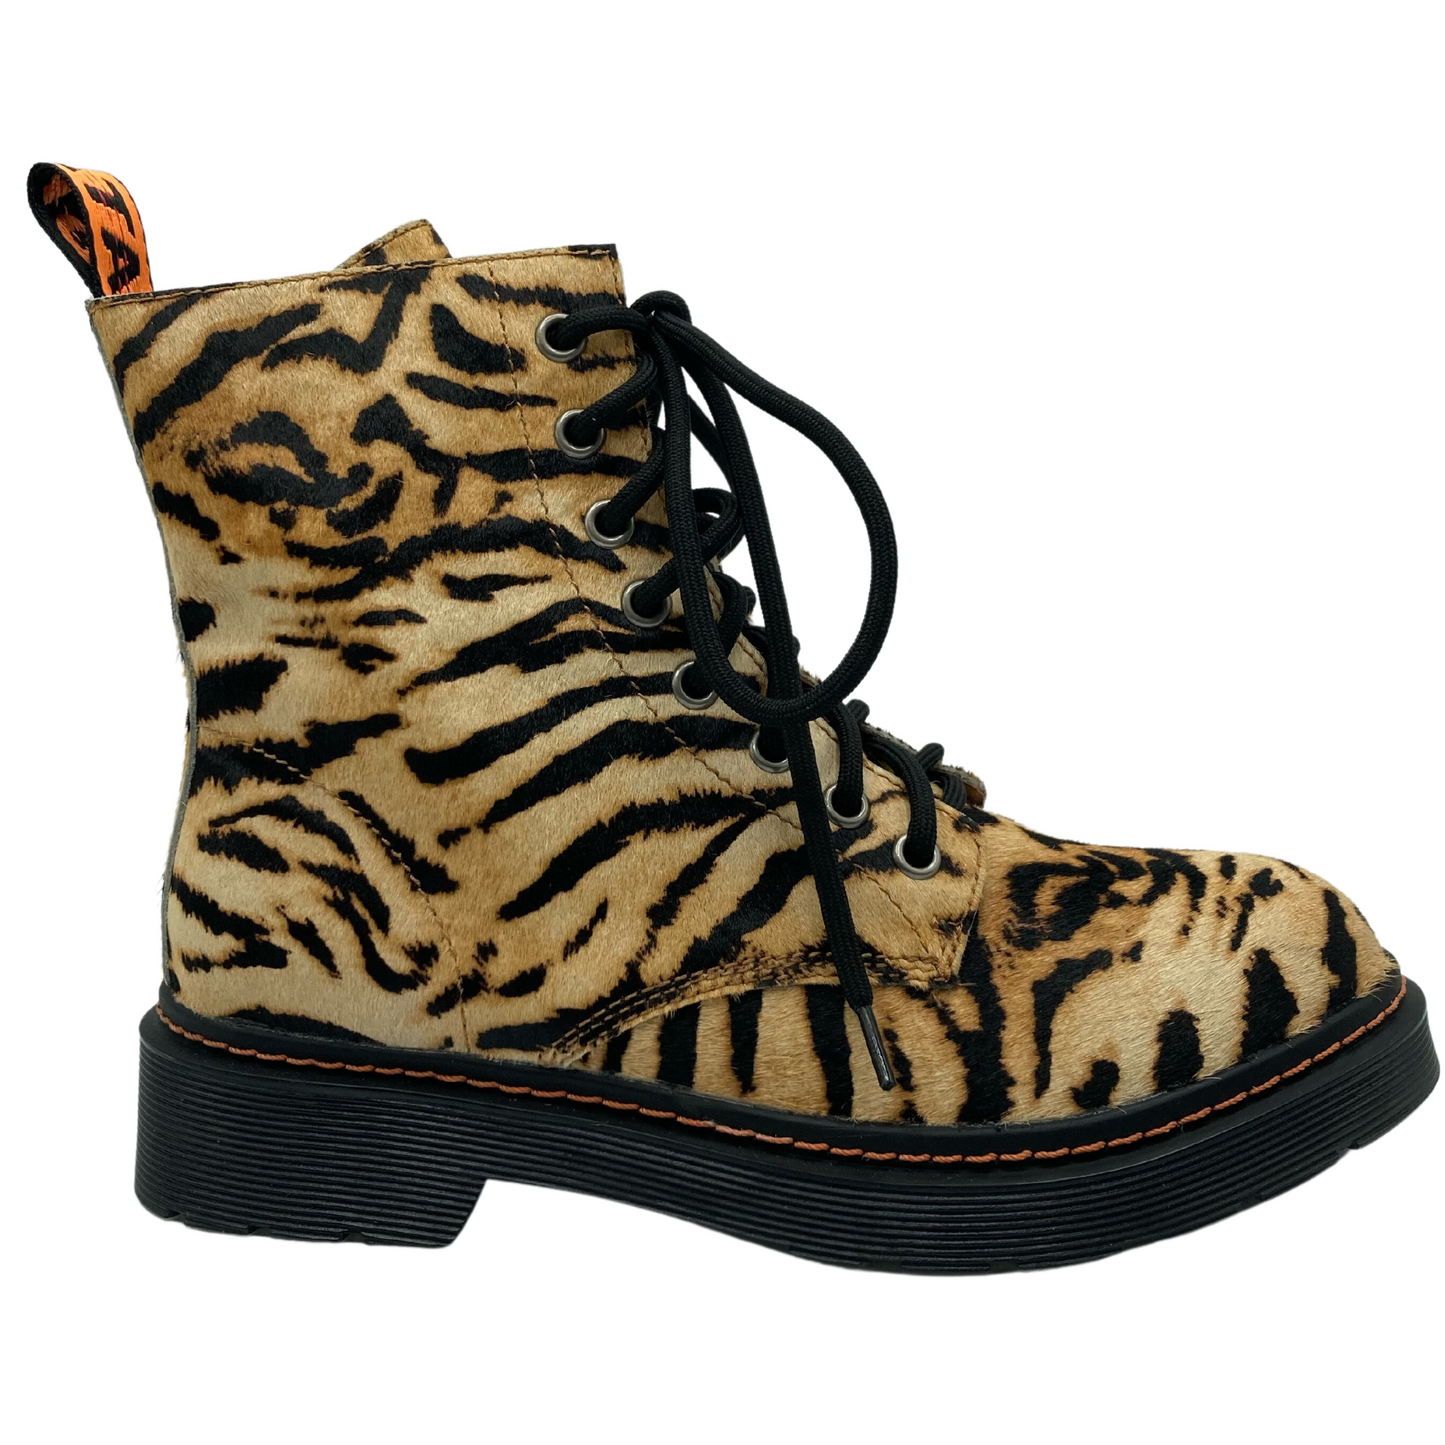 Right facing view of tiger print combat boot with black rubber outsole and black laces